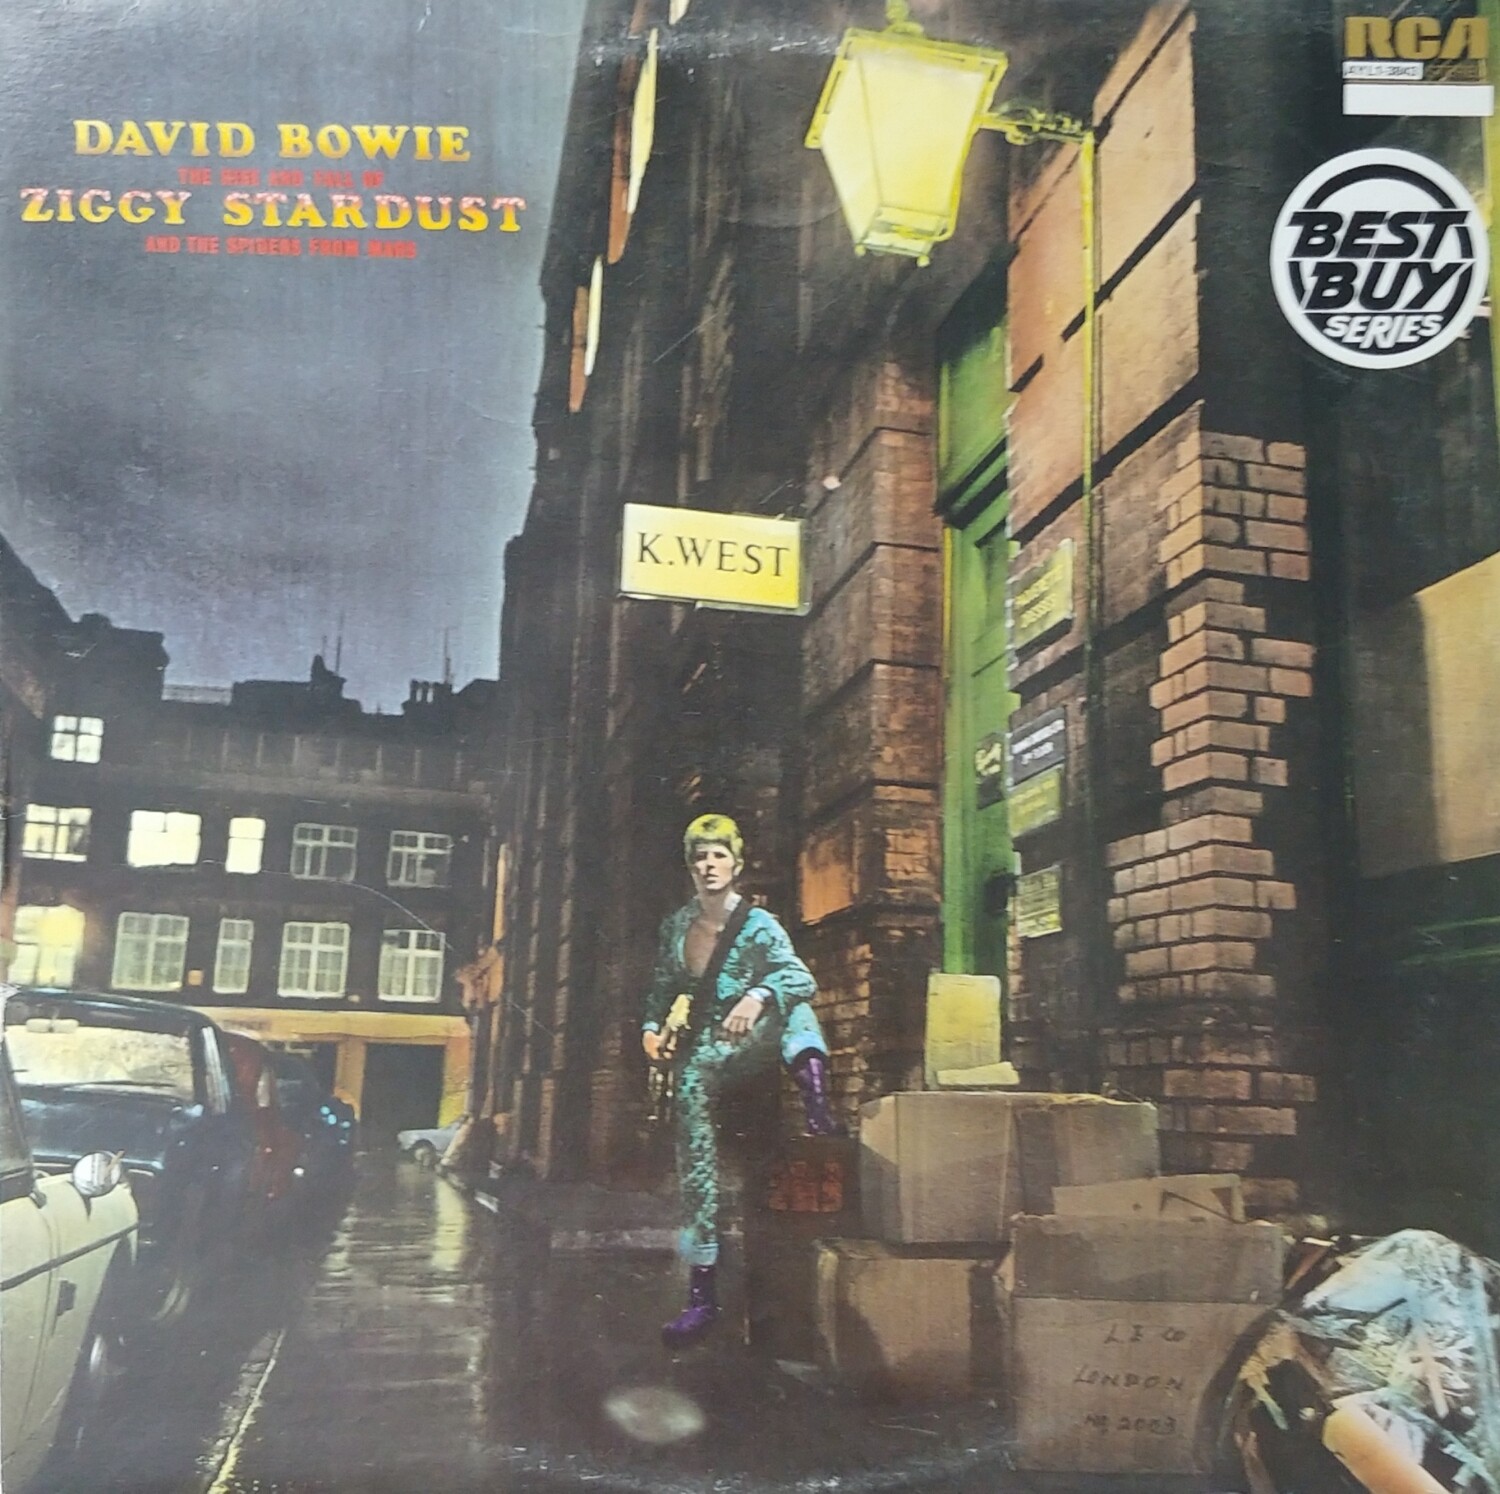 David Bowie - The rise and fall of Ziggy Stardust